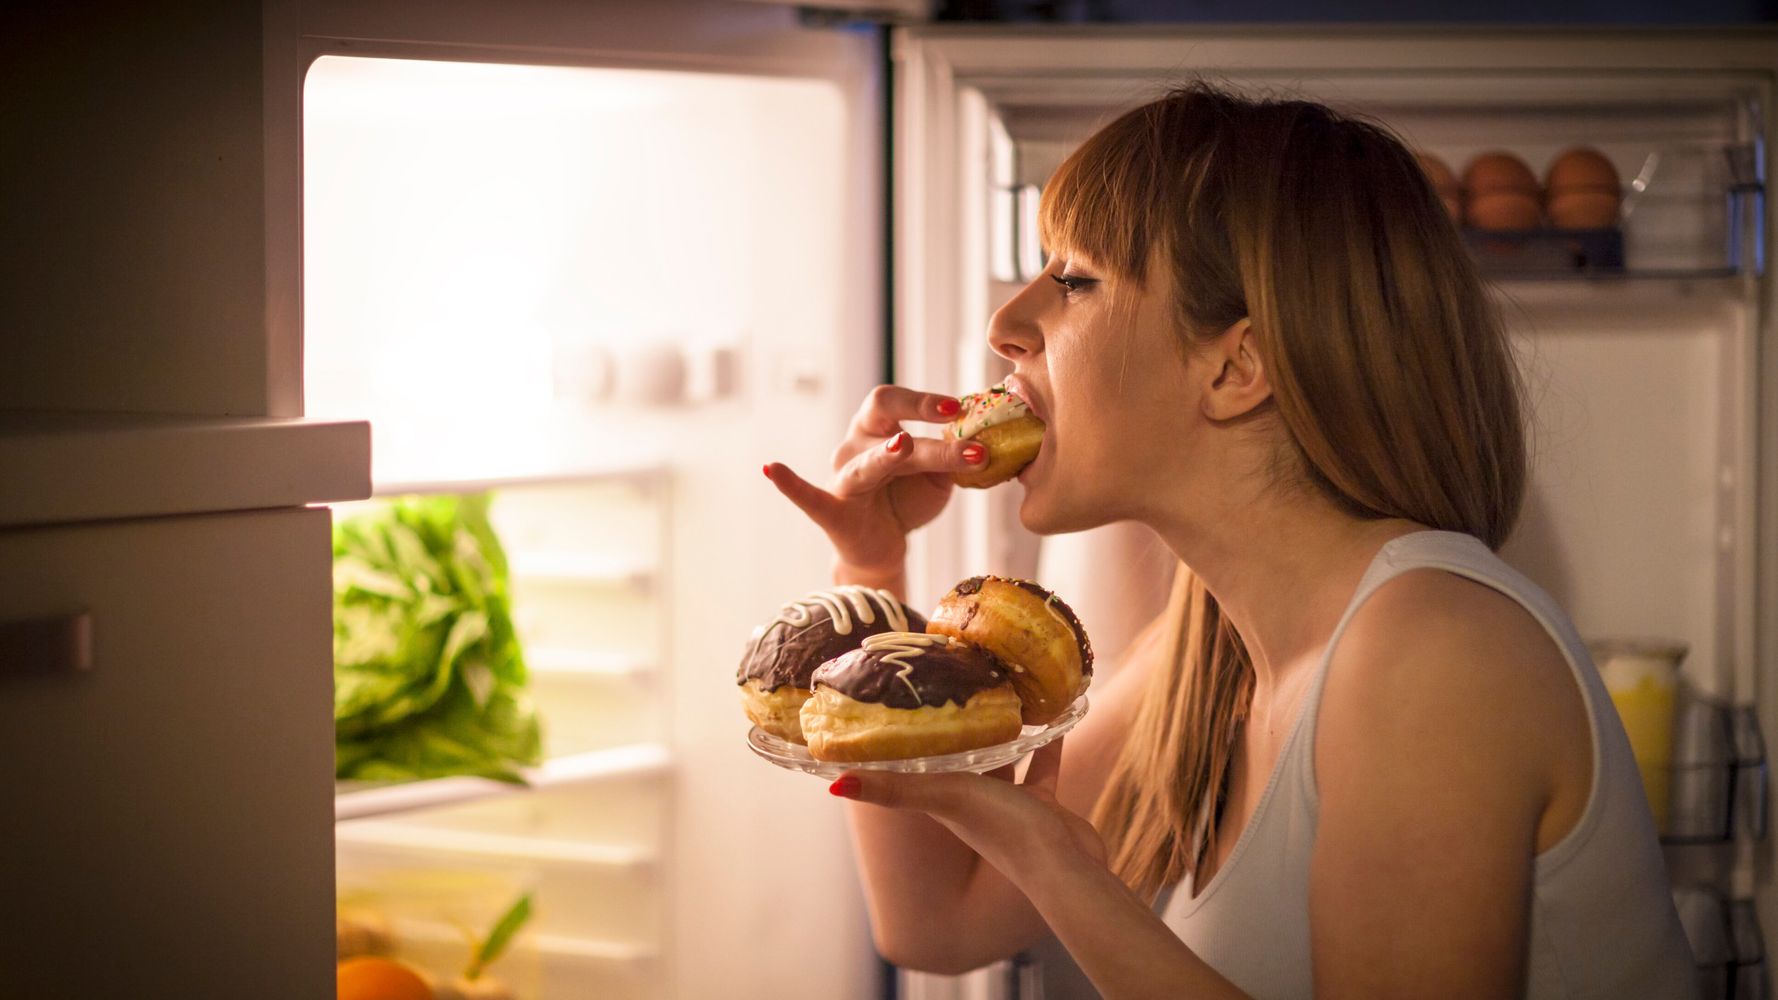 The Difference Between Binge Eating And Emotional Eating